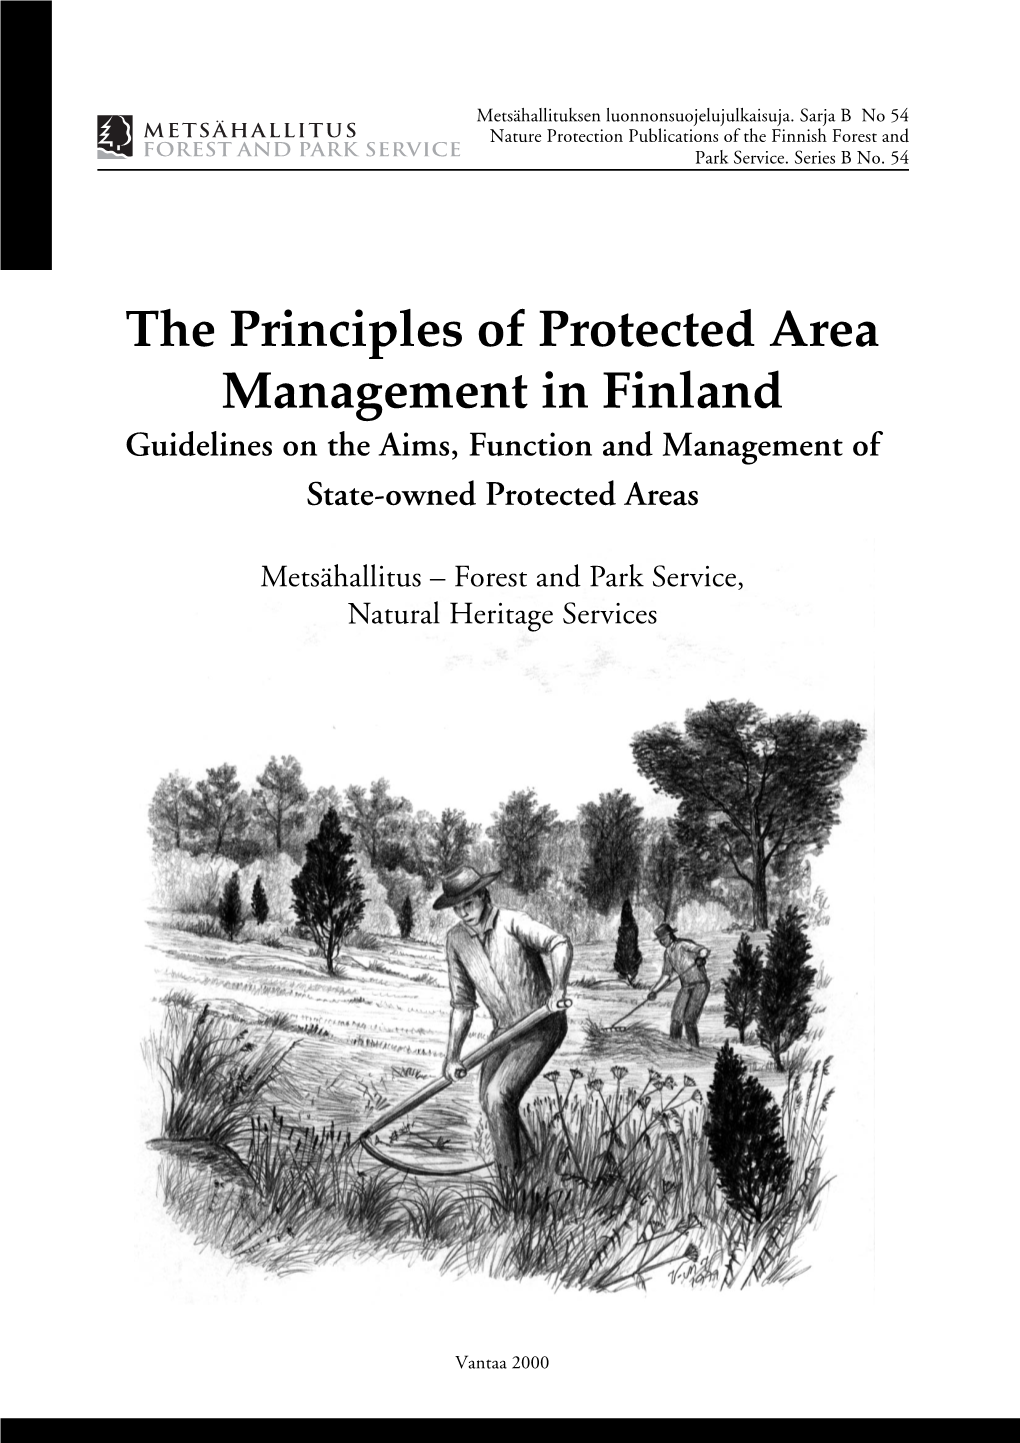 The Principles of Protected Area Management in Finland Guidelines on the Aims, Function and Management of State-Owned Protected Areas